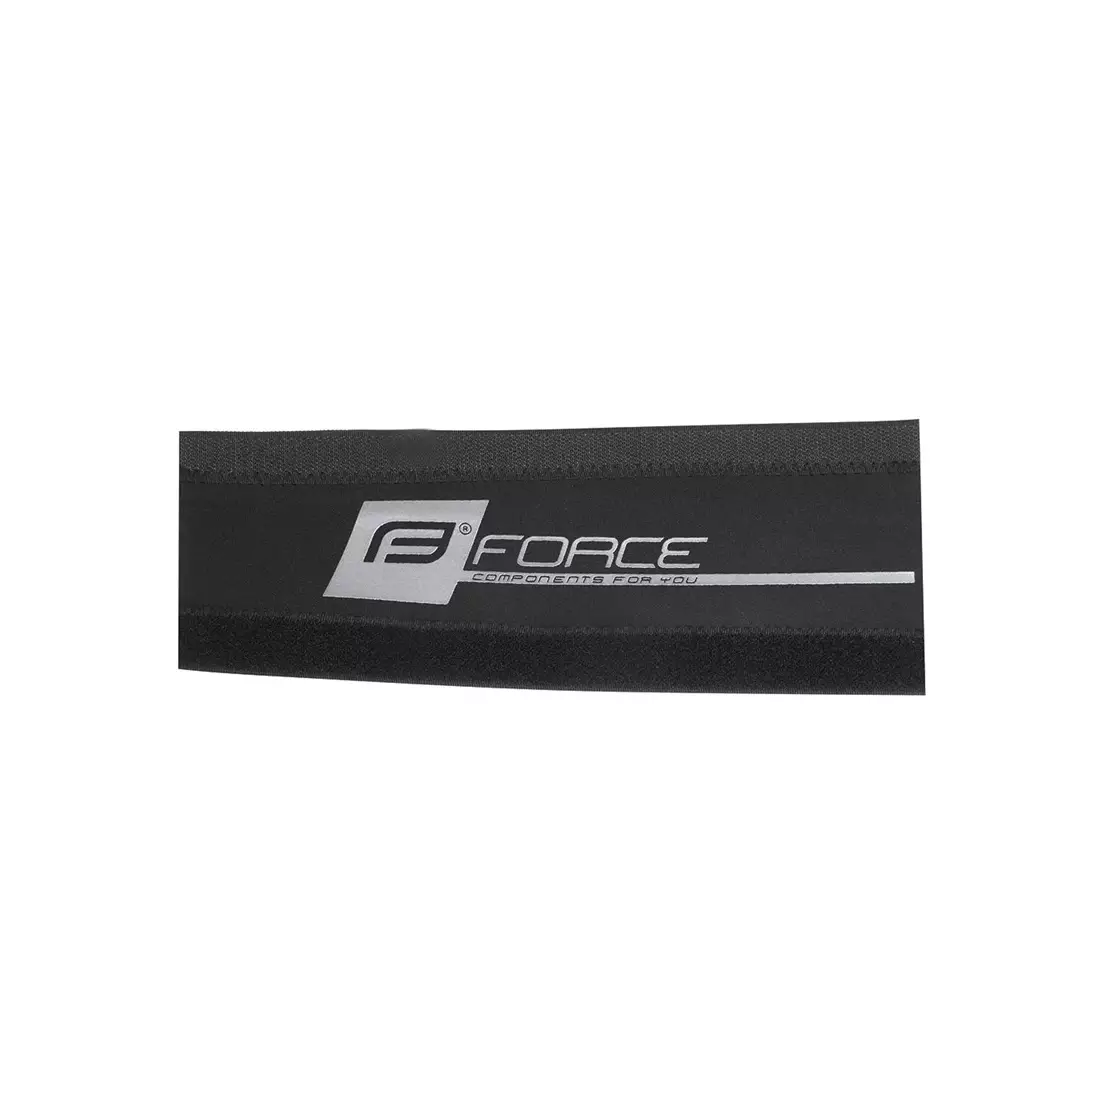 FORCE bicycle frame cover/under the chain velo neoprene titan 16334